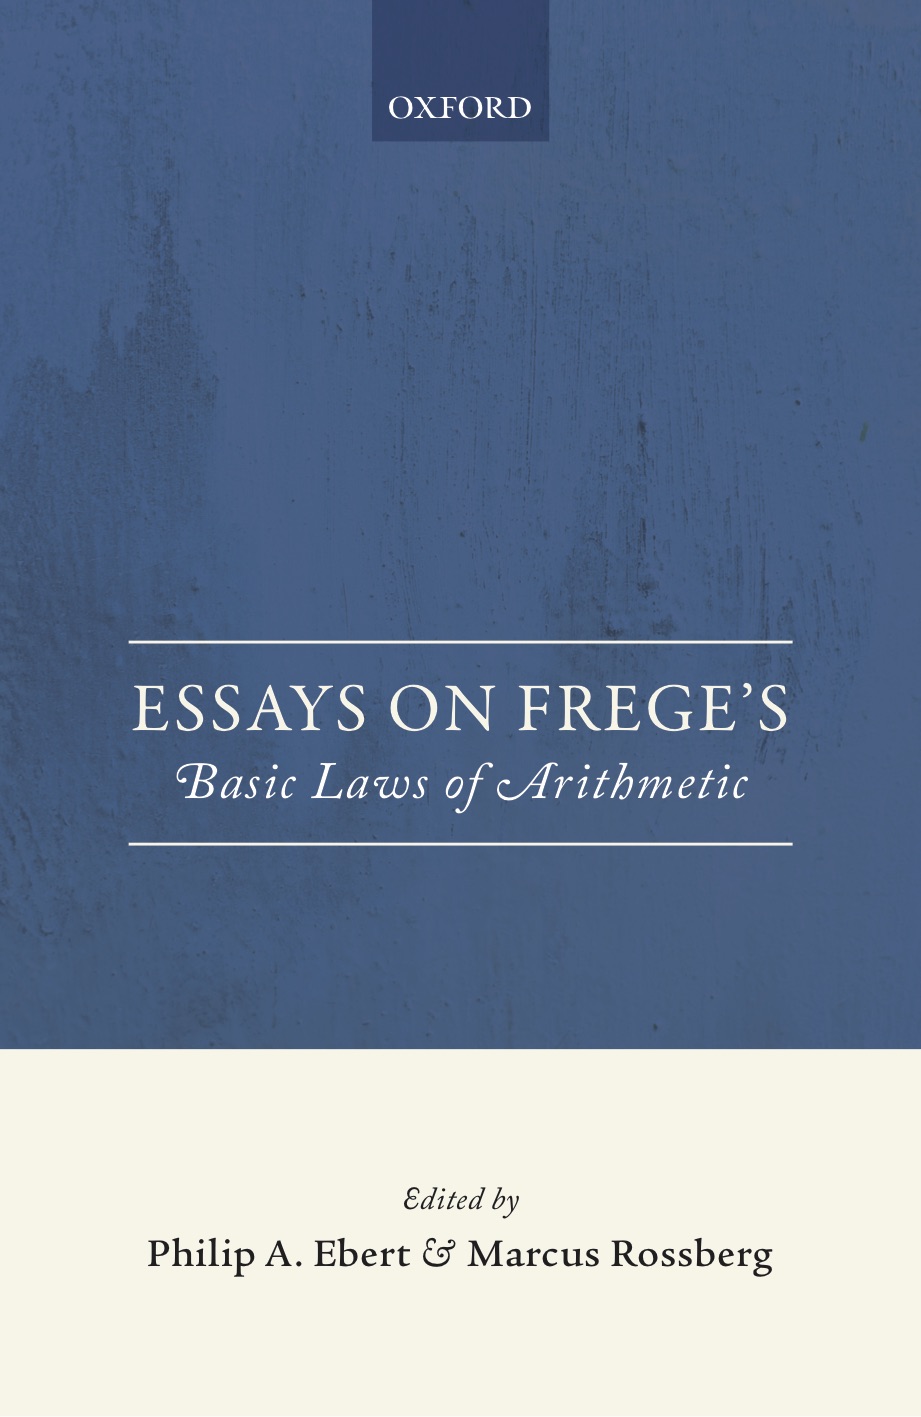 Essays on Frege's Basic Laws of Arithmetic, ed. Philip A. Ebert and Marcus Rossberg